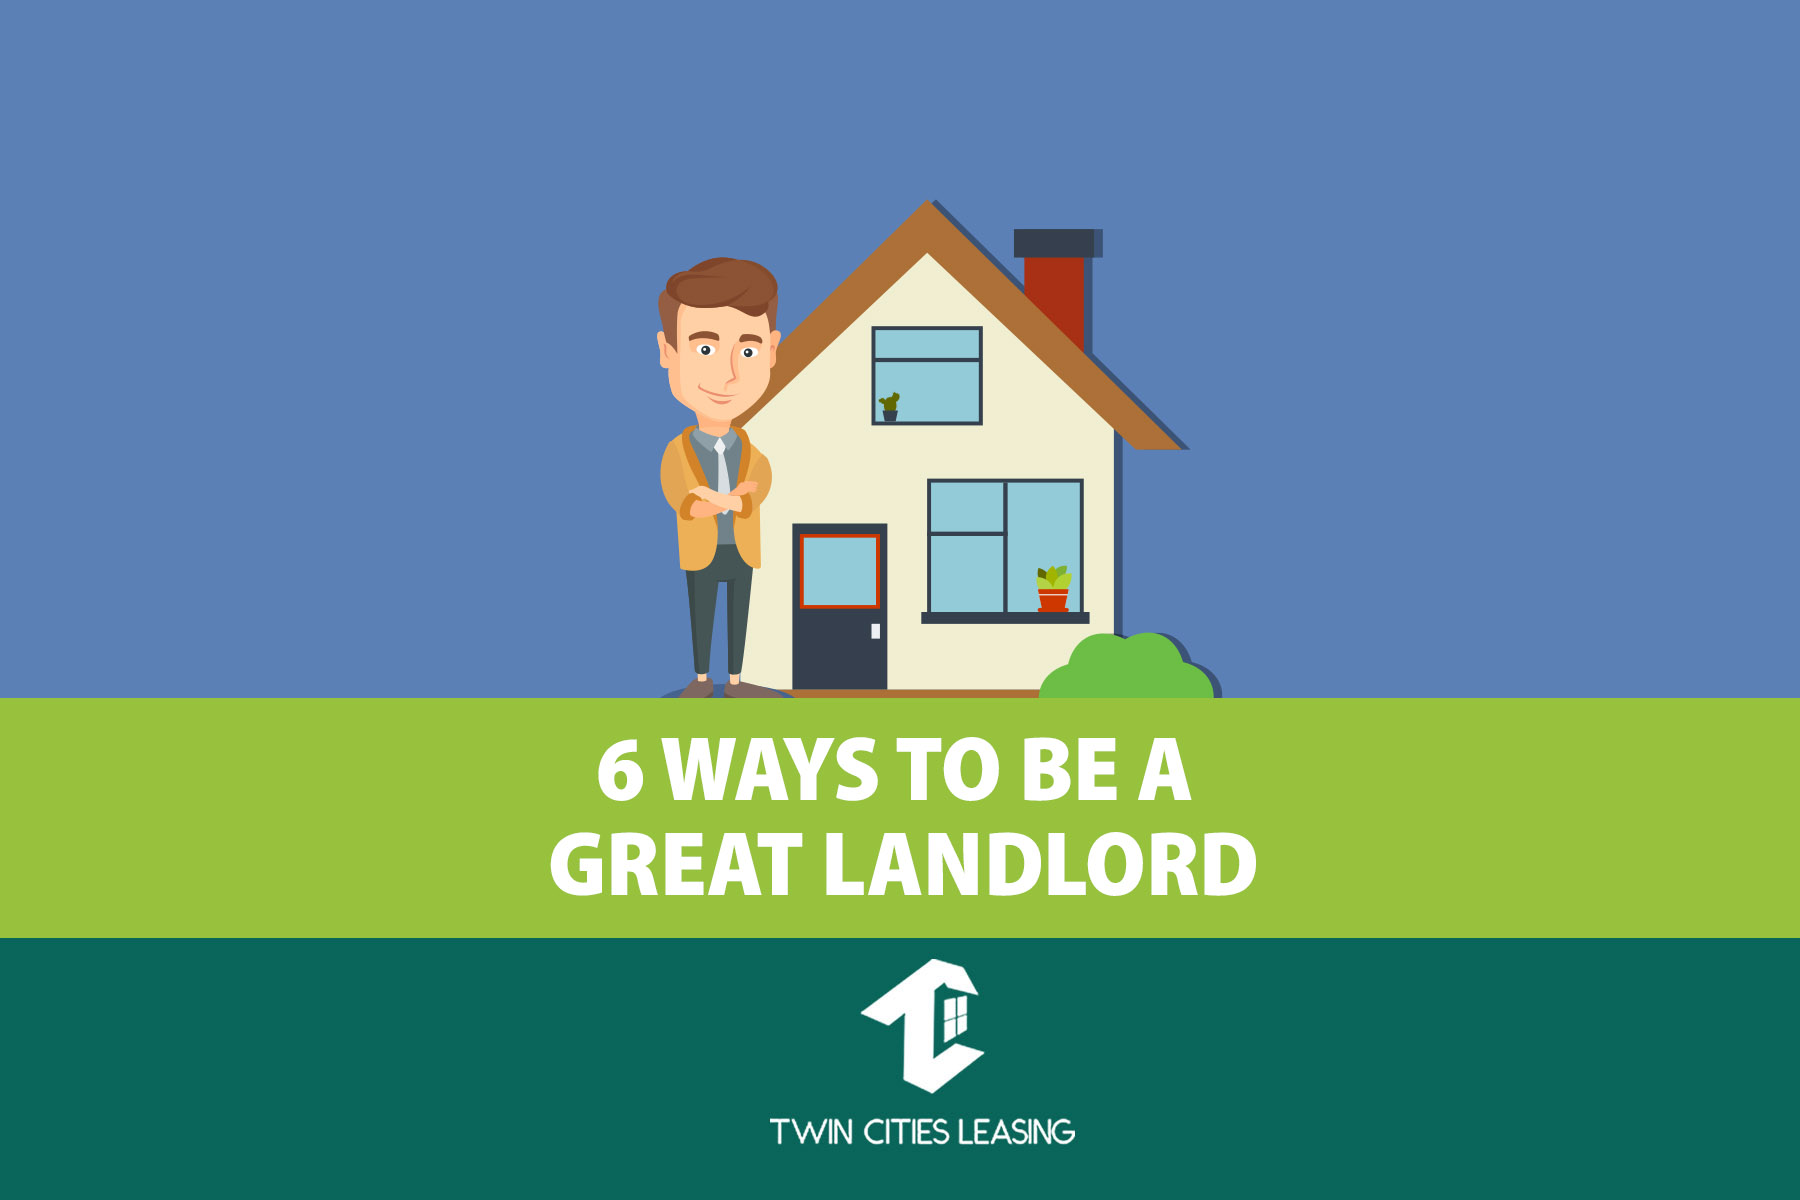 6 Ways to Be a Great Landlord